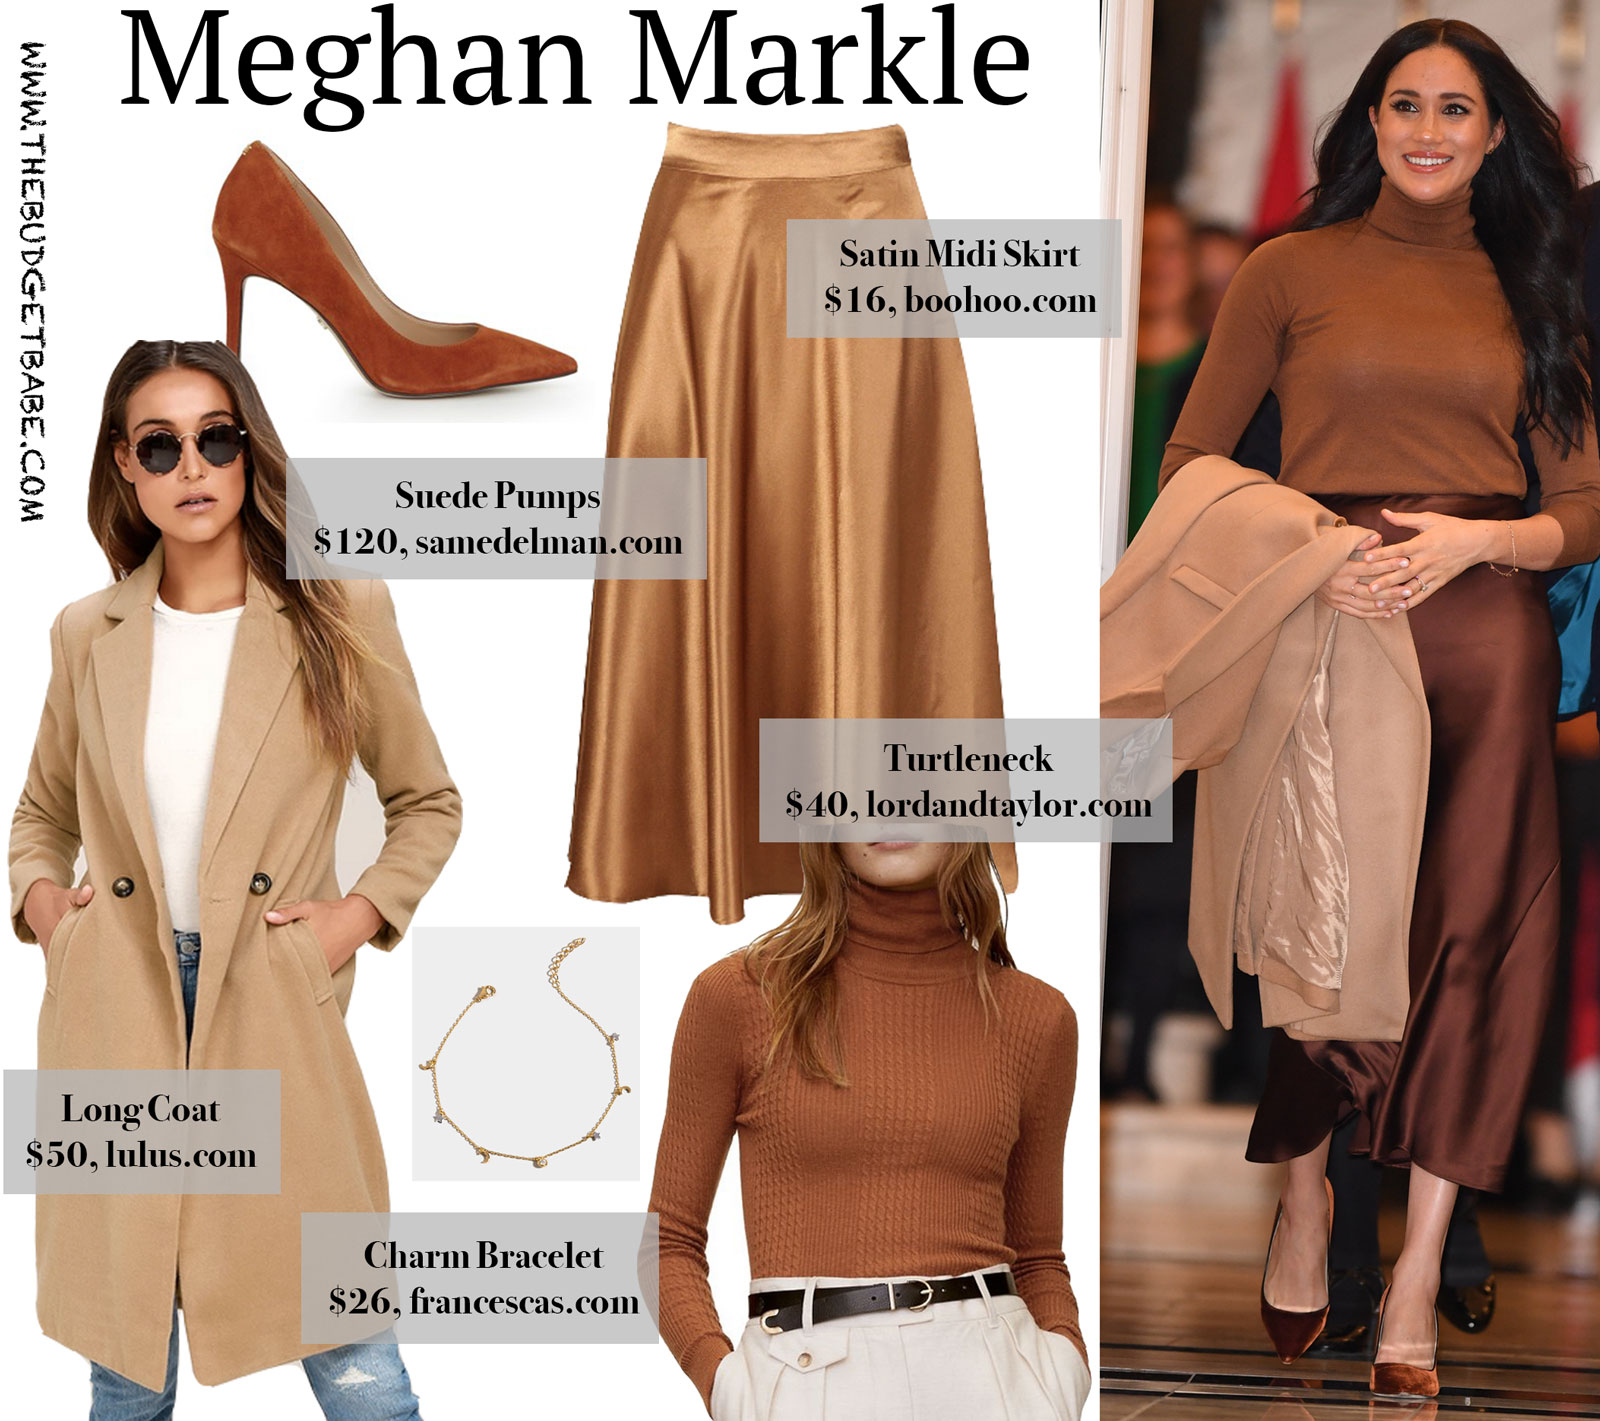 Meghan Markle Satin Skirt and Jimmy Choos Look for Less